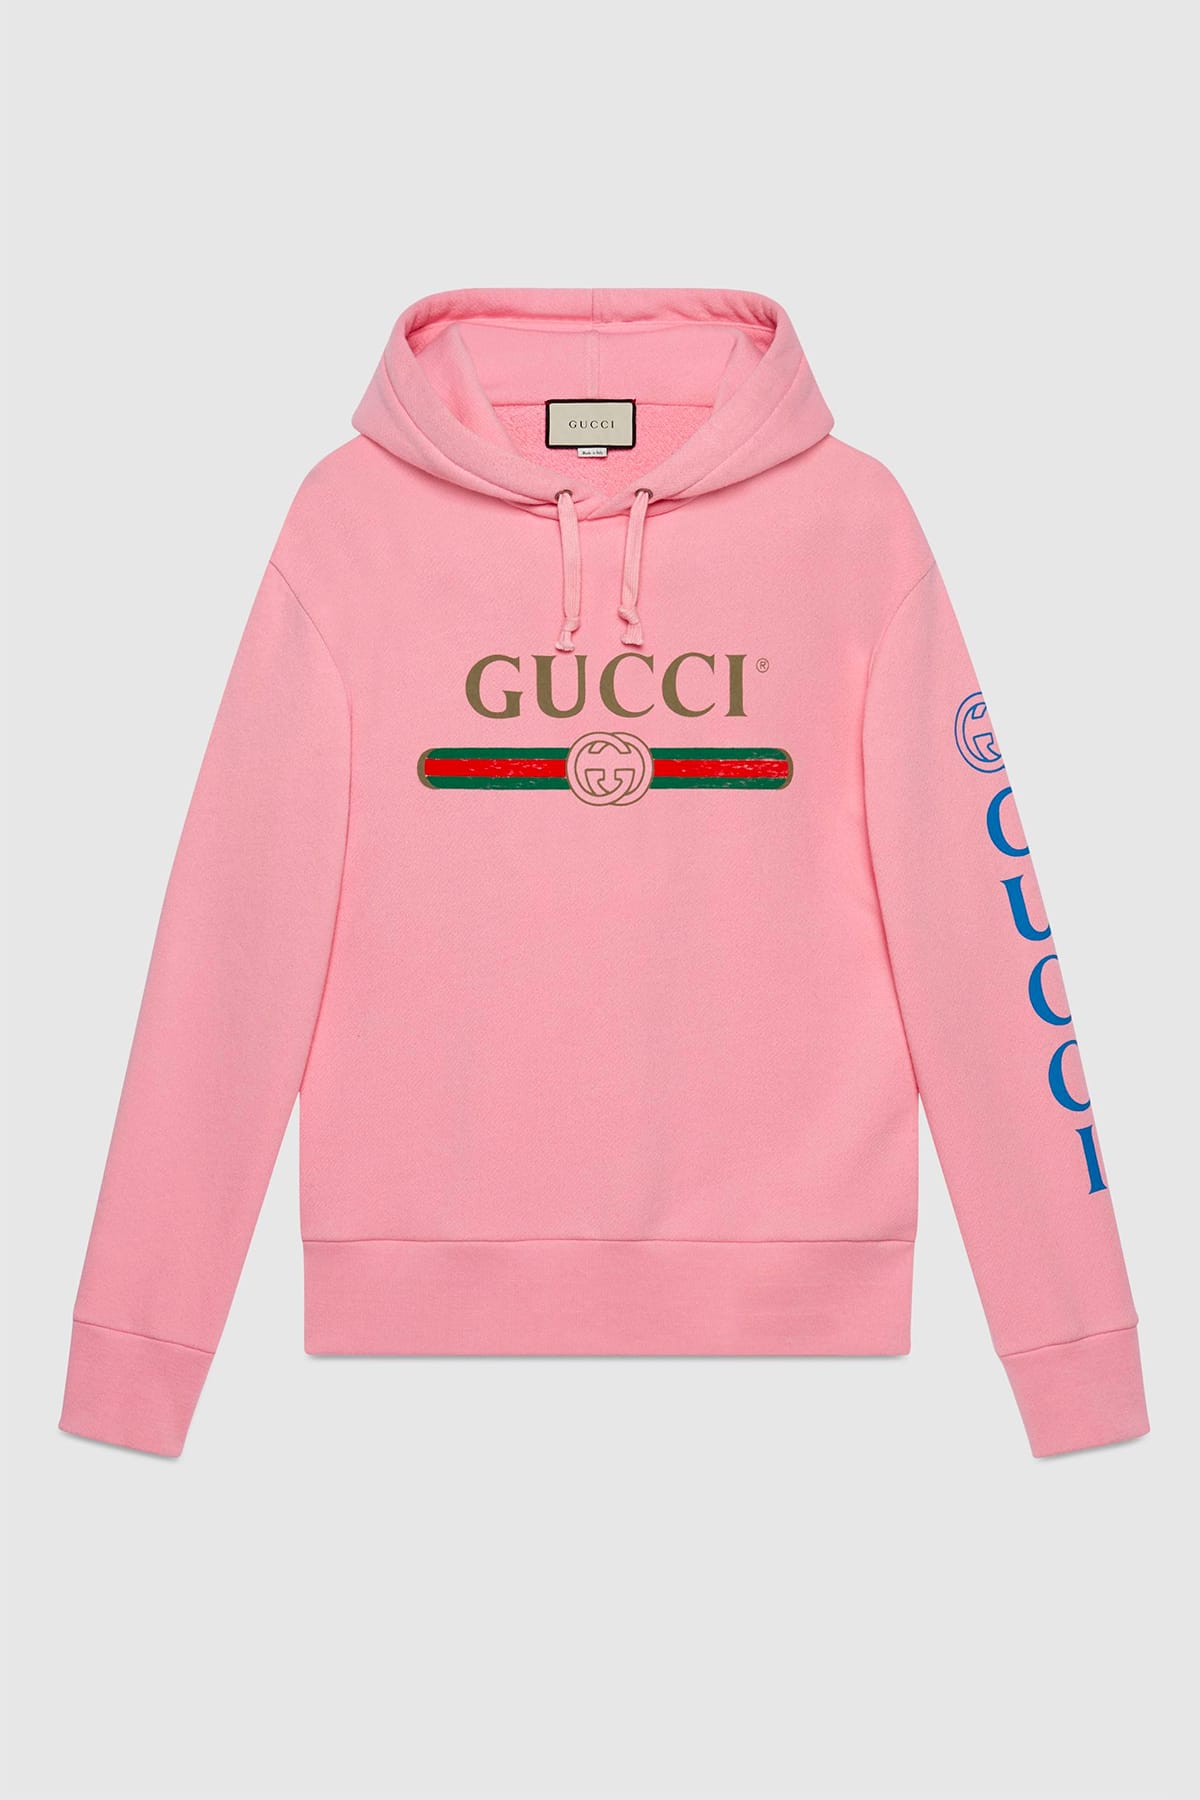 gucci baby pink